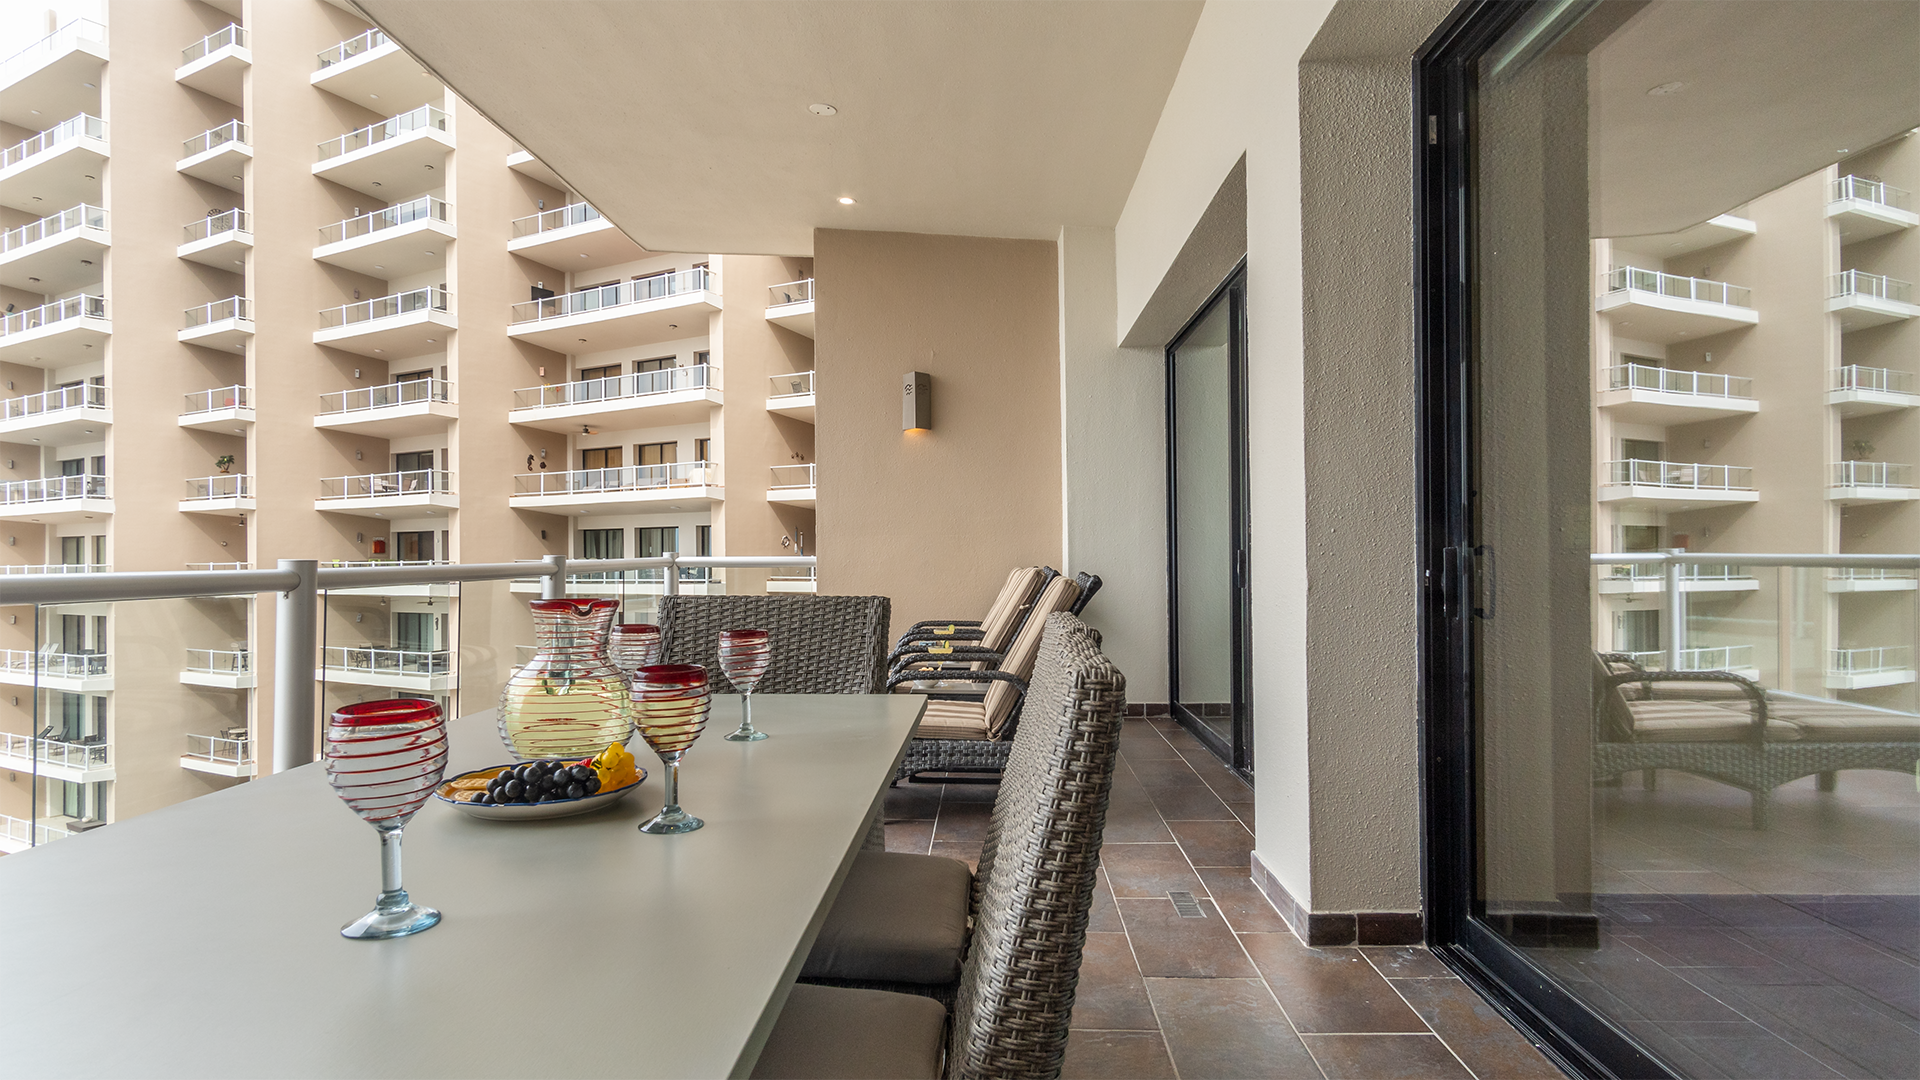 The spacious patio with chaise lounge chairs and a full dining table.